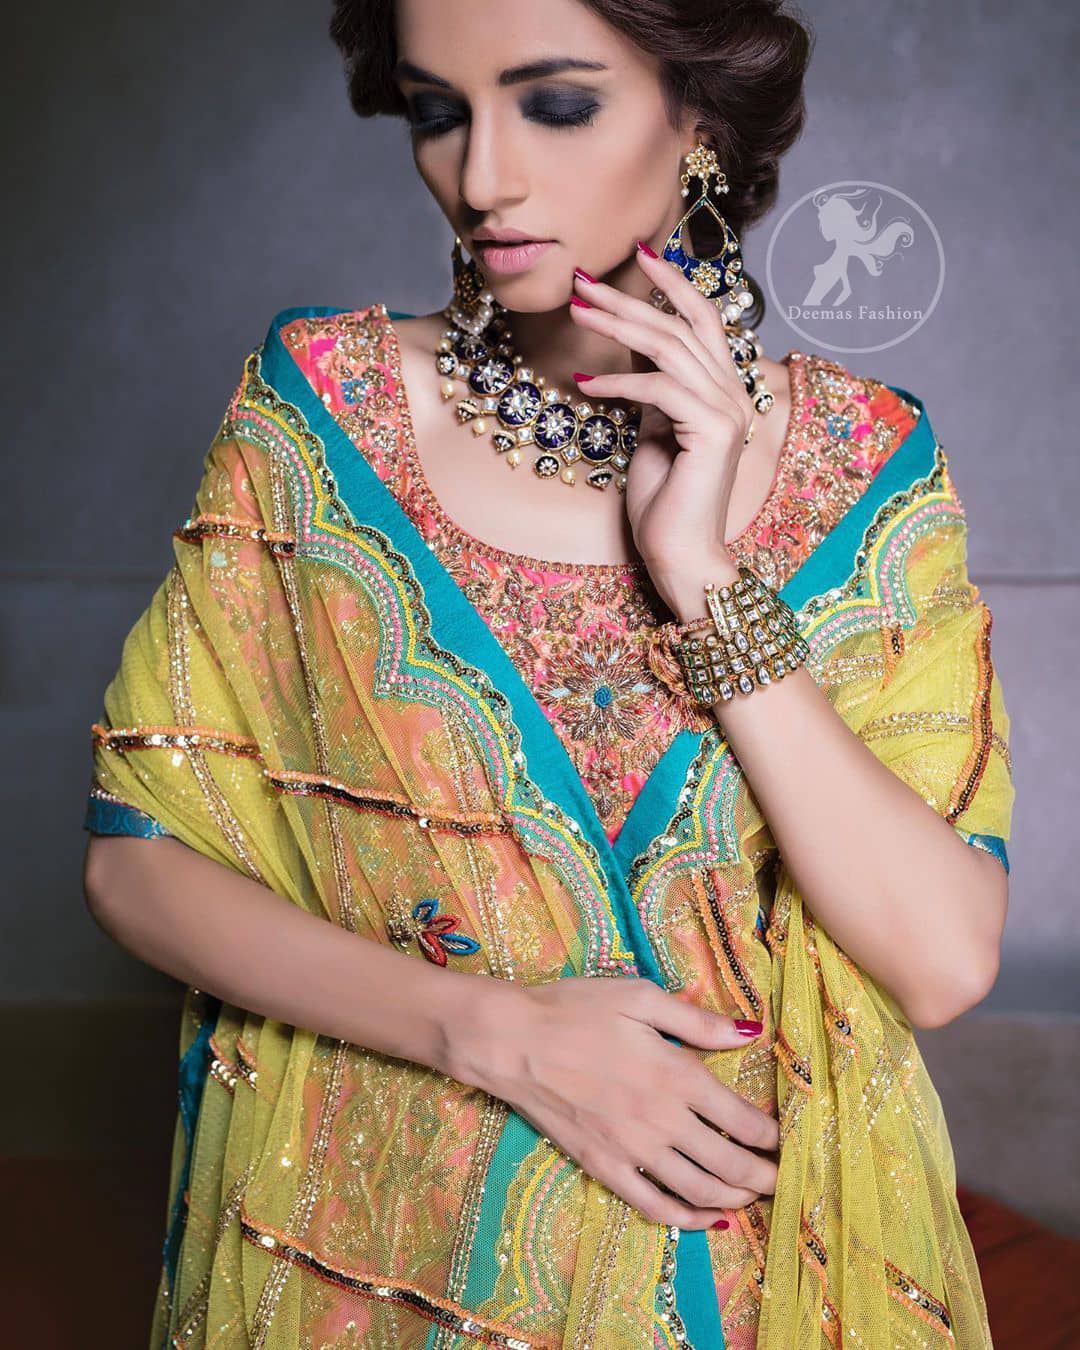 Our tea rose shirt with exquisite embellished neckline and back neckline in kora, dabka sequins and intricate thread work. The daaman is emphasized on intricate floral details that gives perfect ending to this shirt. It is coordinated with farshy gharara decorated with embroidery. The gradient turmeric dupatta has crisscross pattern and floral motifs scattered. It is finished with jamawar piping all around the edges.